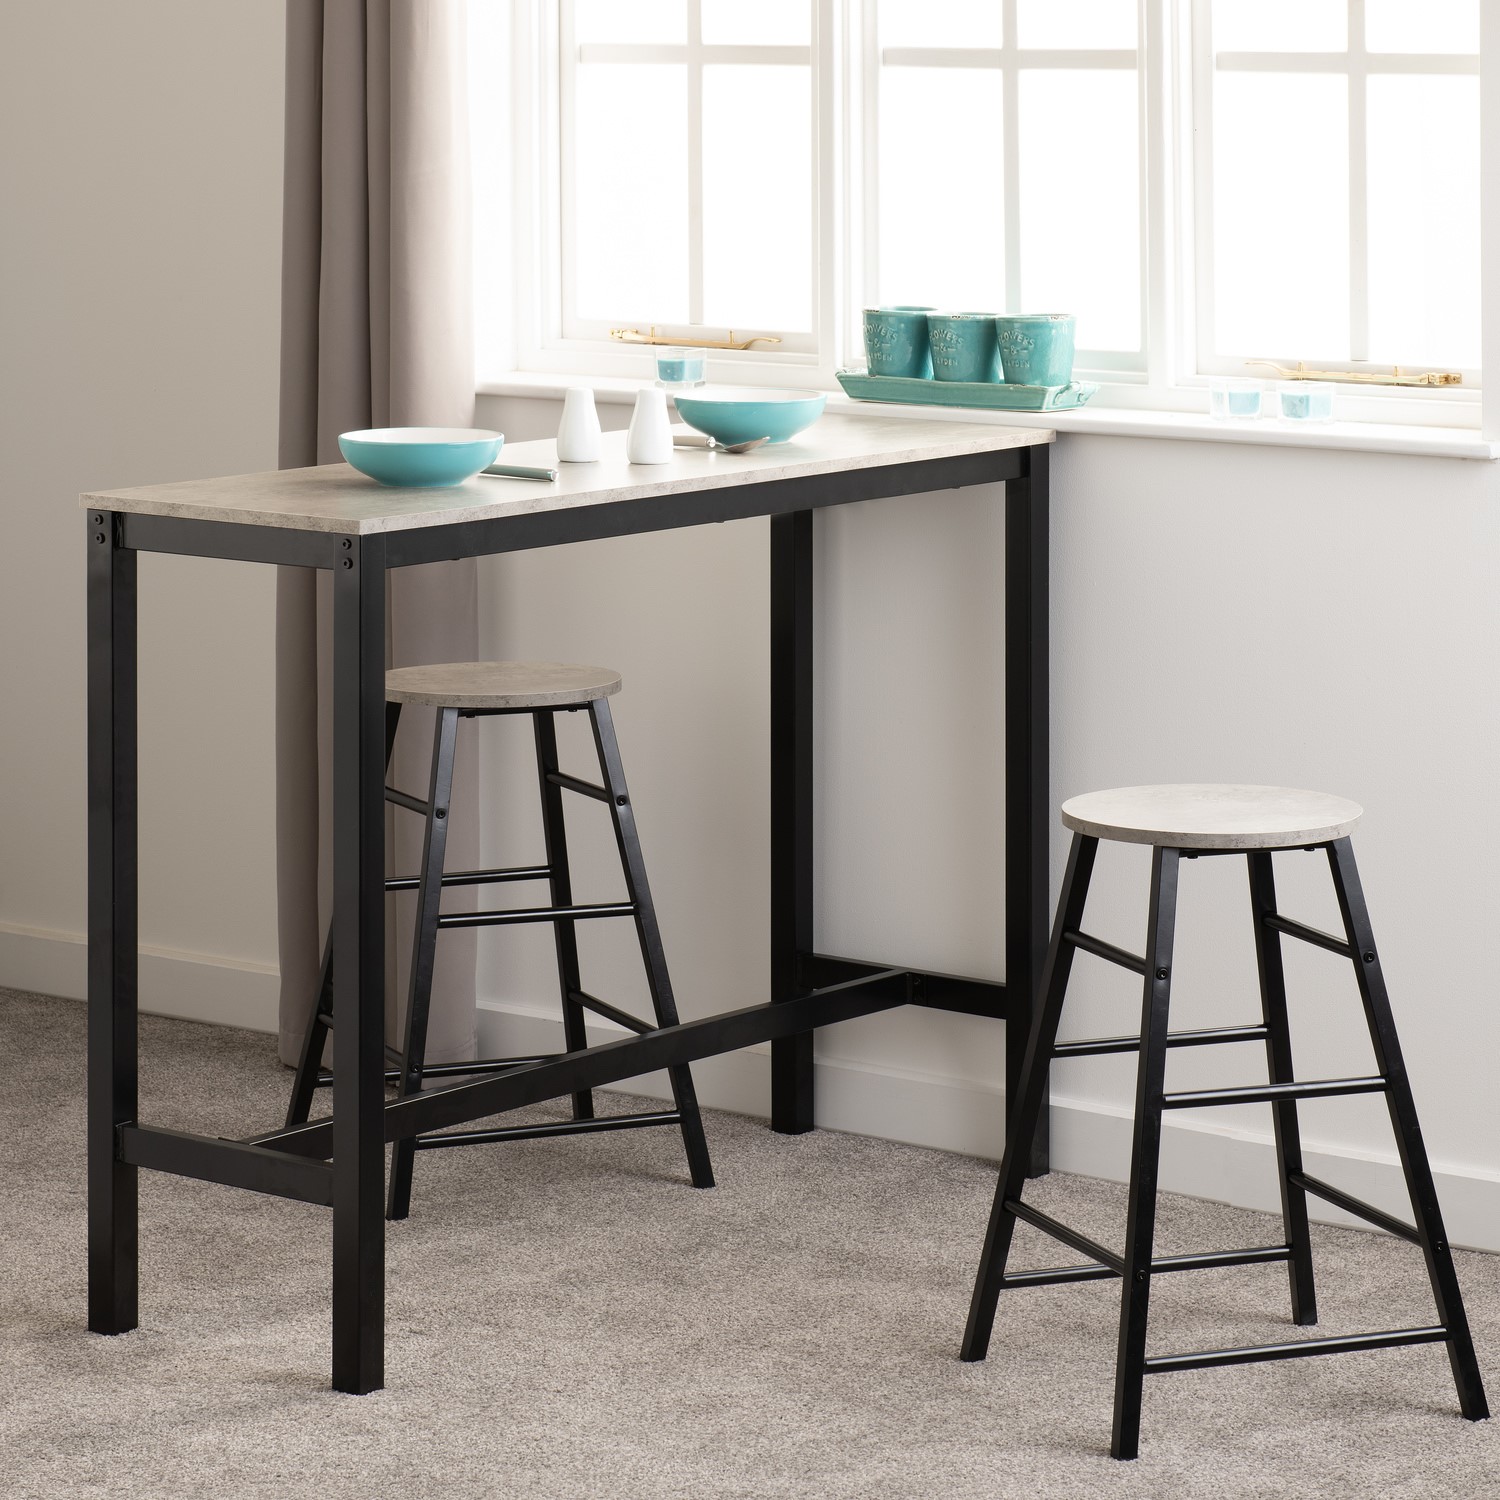 Photo of Concrete effect bar table and stools set - seats 2 - athens